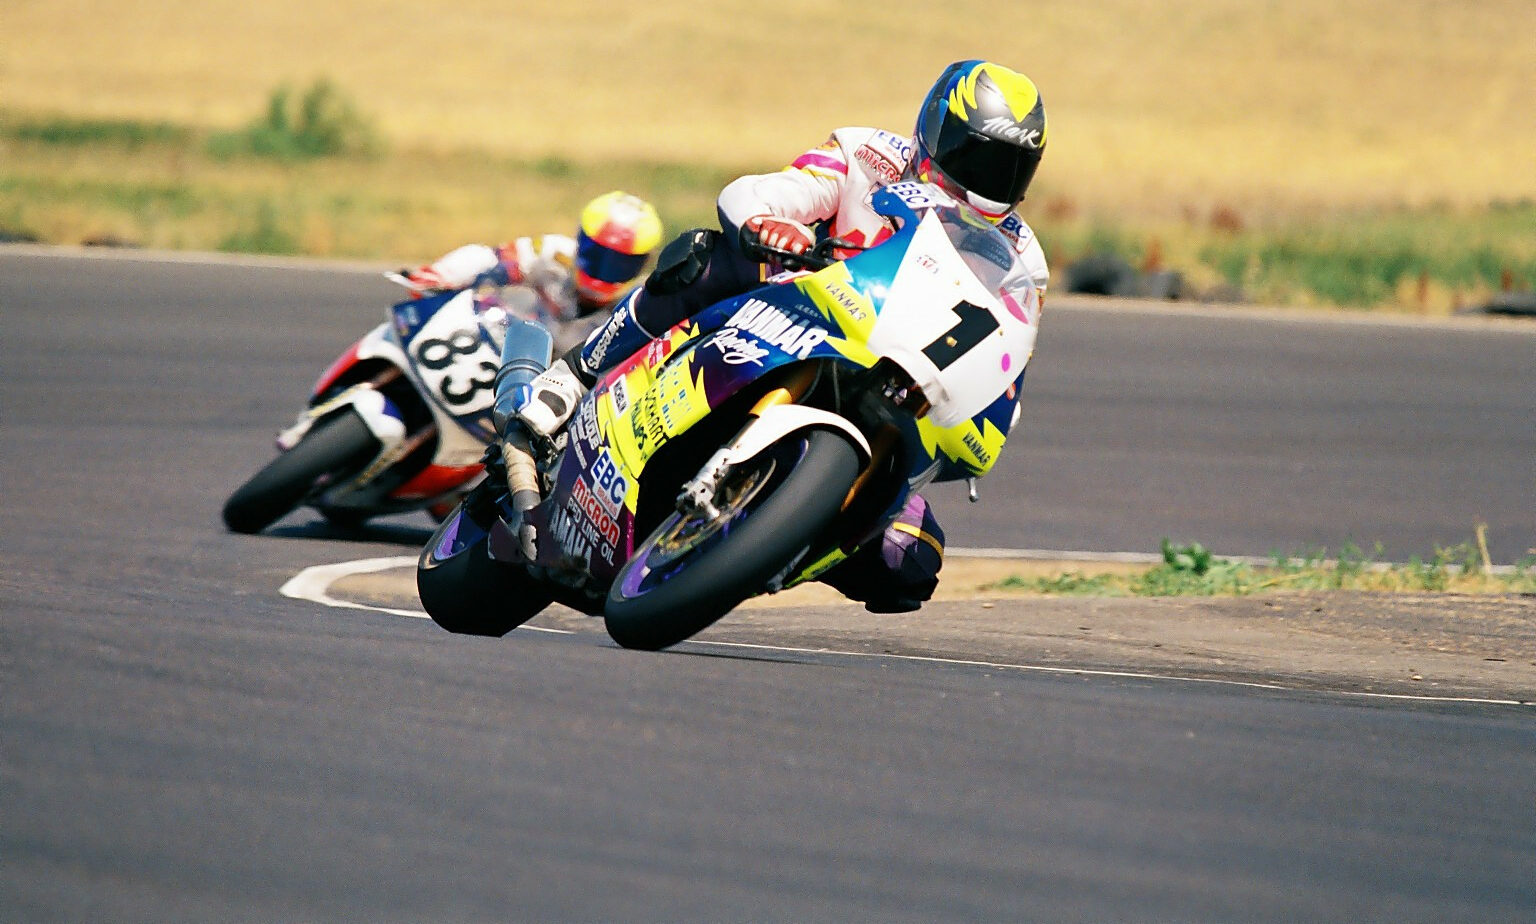 Mark Schellinger (1) leading Doug Vickery (83) during a MRA race in 1995 at Second Creek Raceway. Photo by John Weiland, courtesy Colorado Motorsports Hall of Fame.